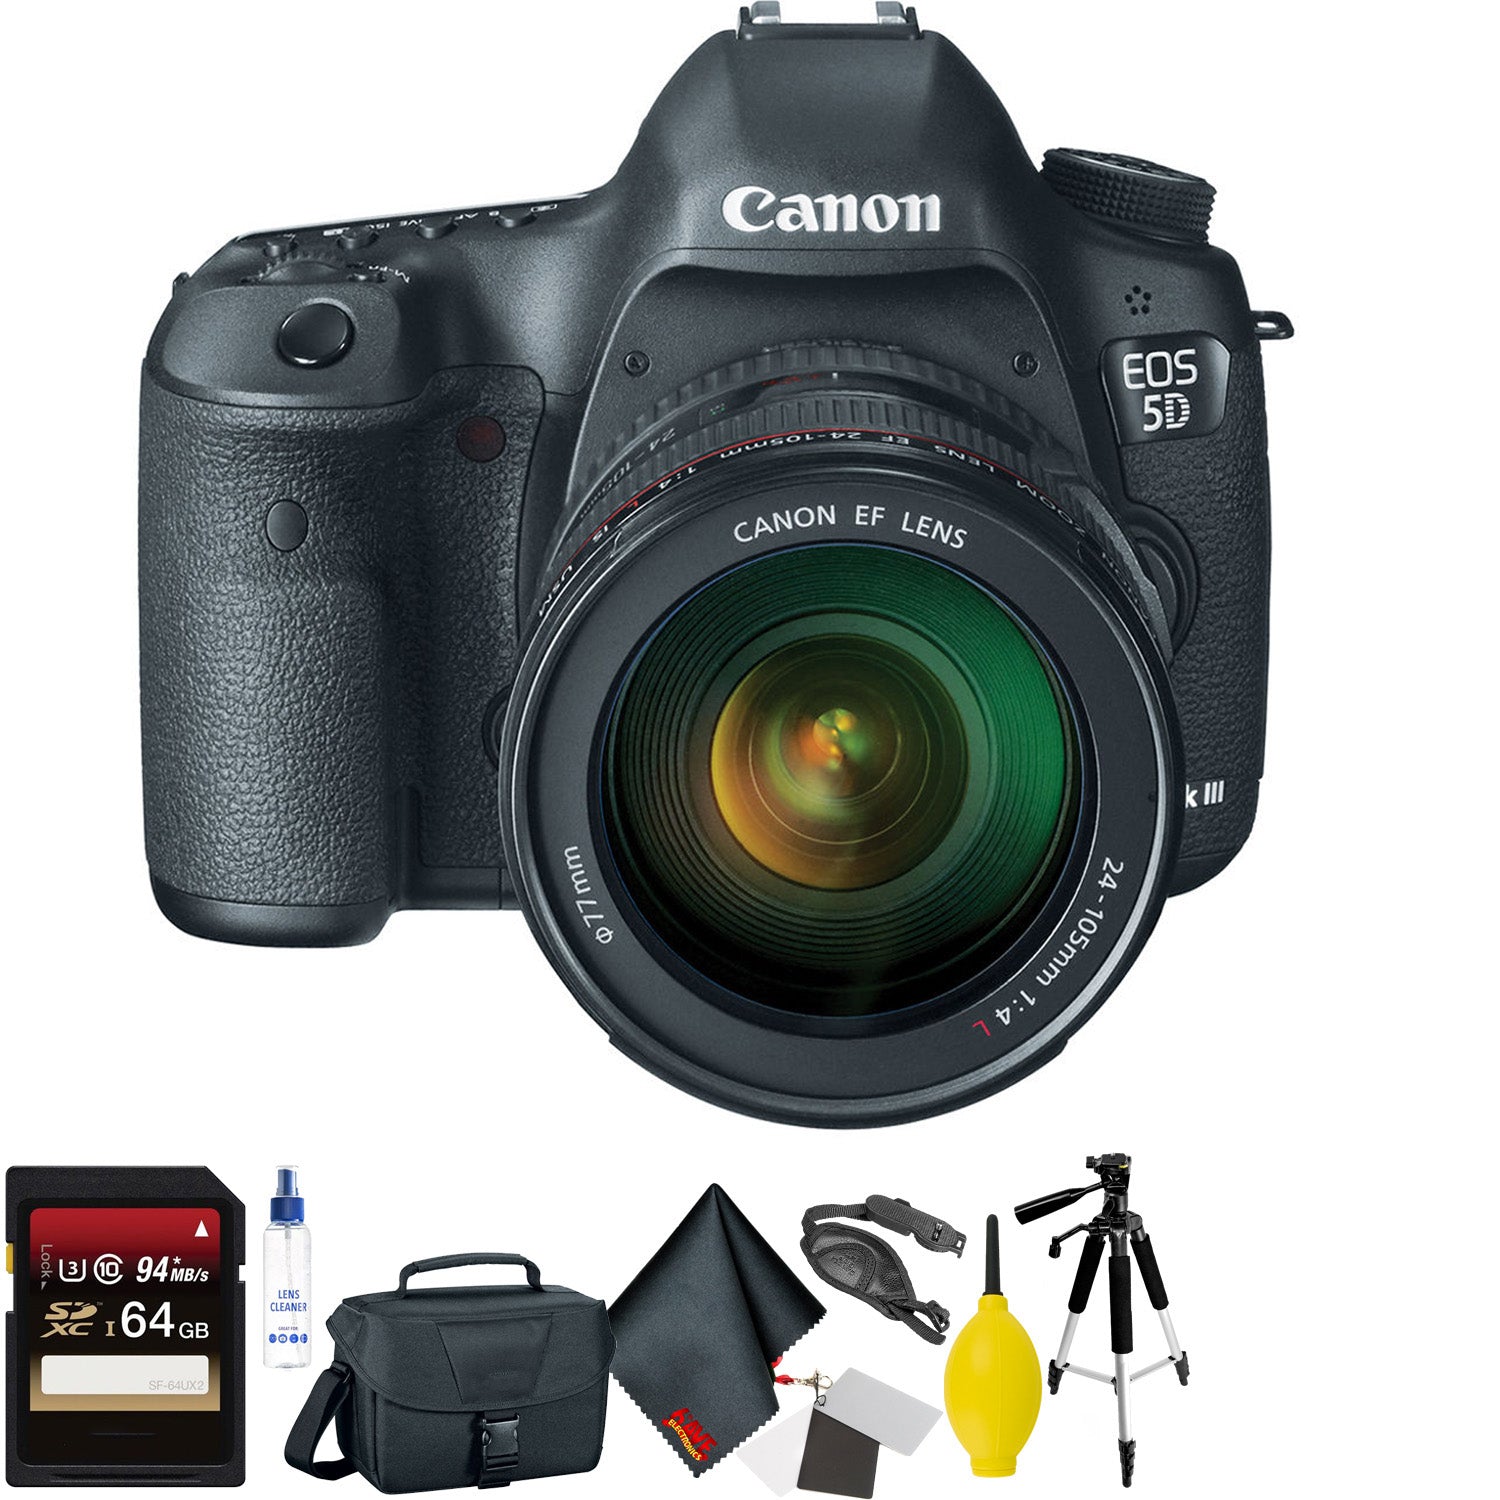 Canon EOS 5D Mark III DSLR Camera with 24-105mm Lens + 64GB Memory Card + Mega Accessory Kit + 2 Year Accidental Warrant Bundle